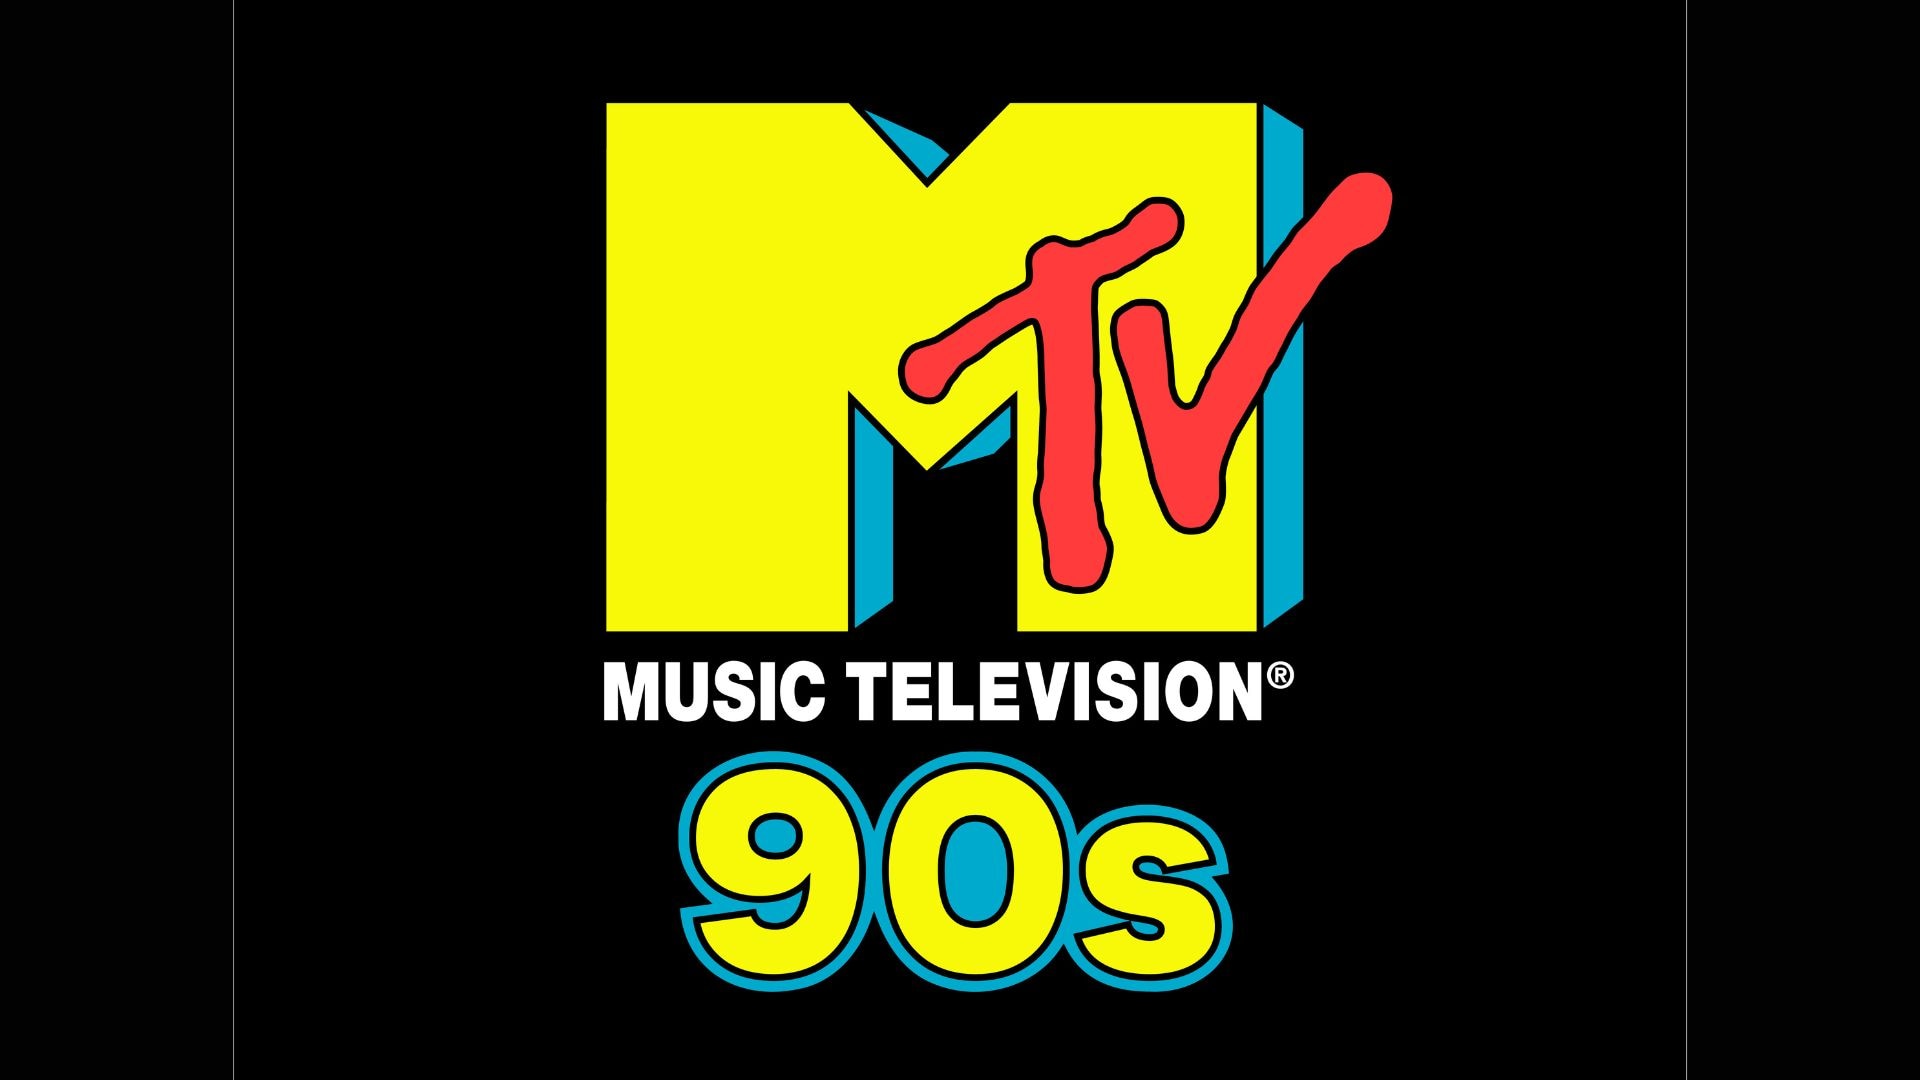 05 MTV 90s channel